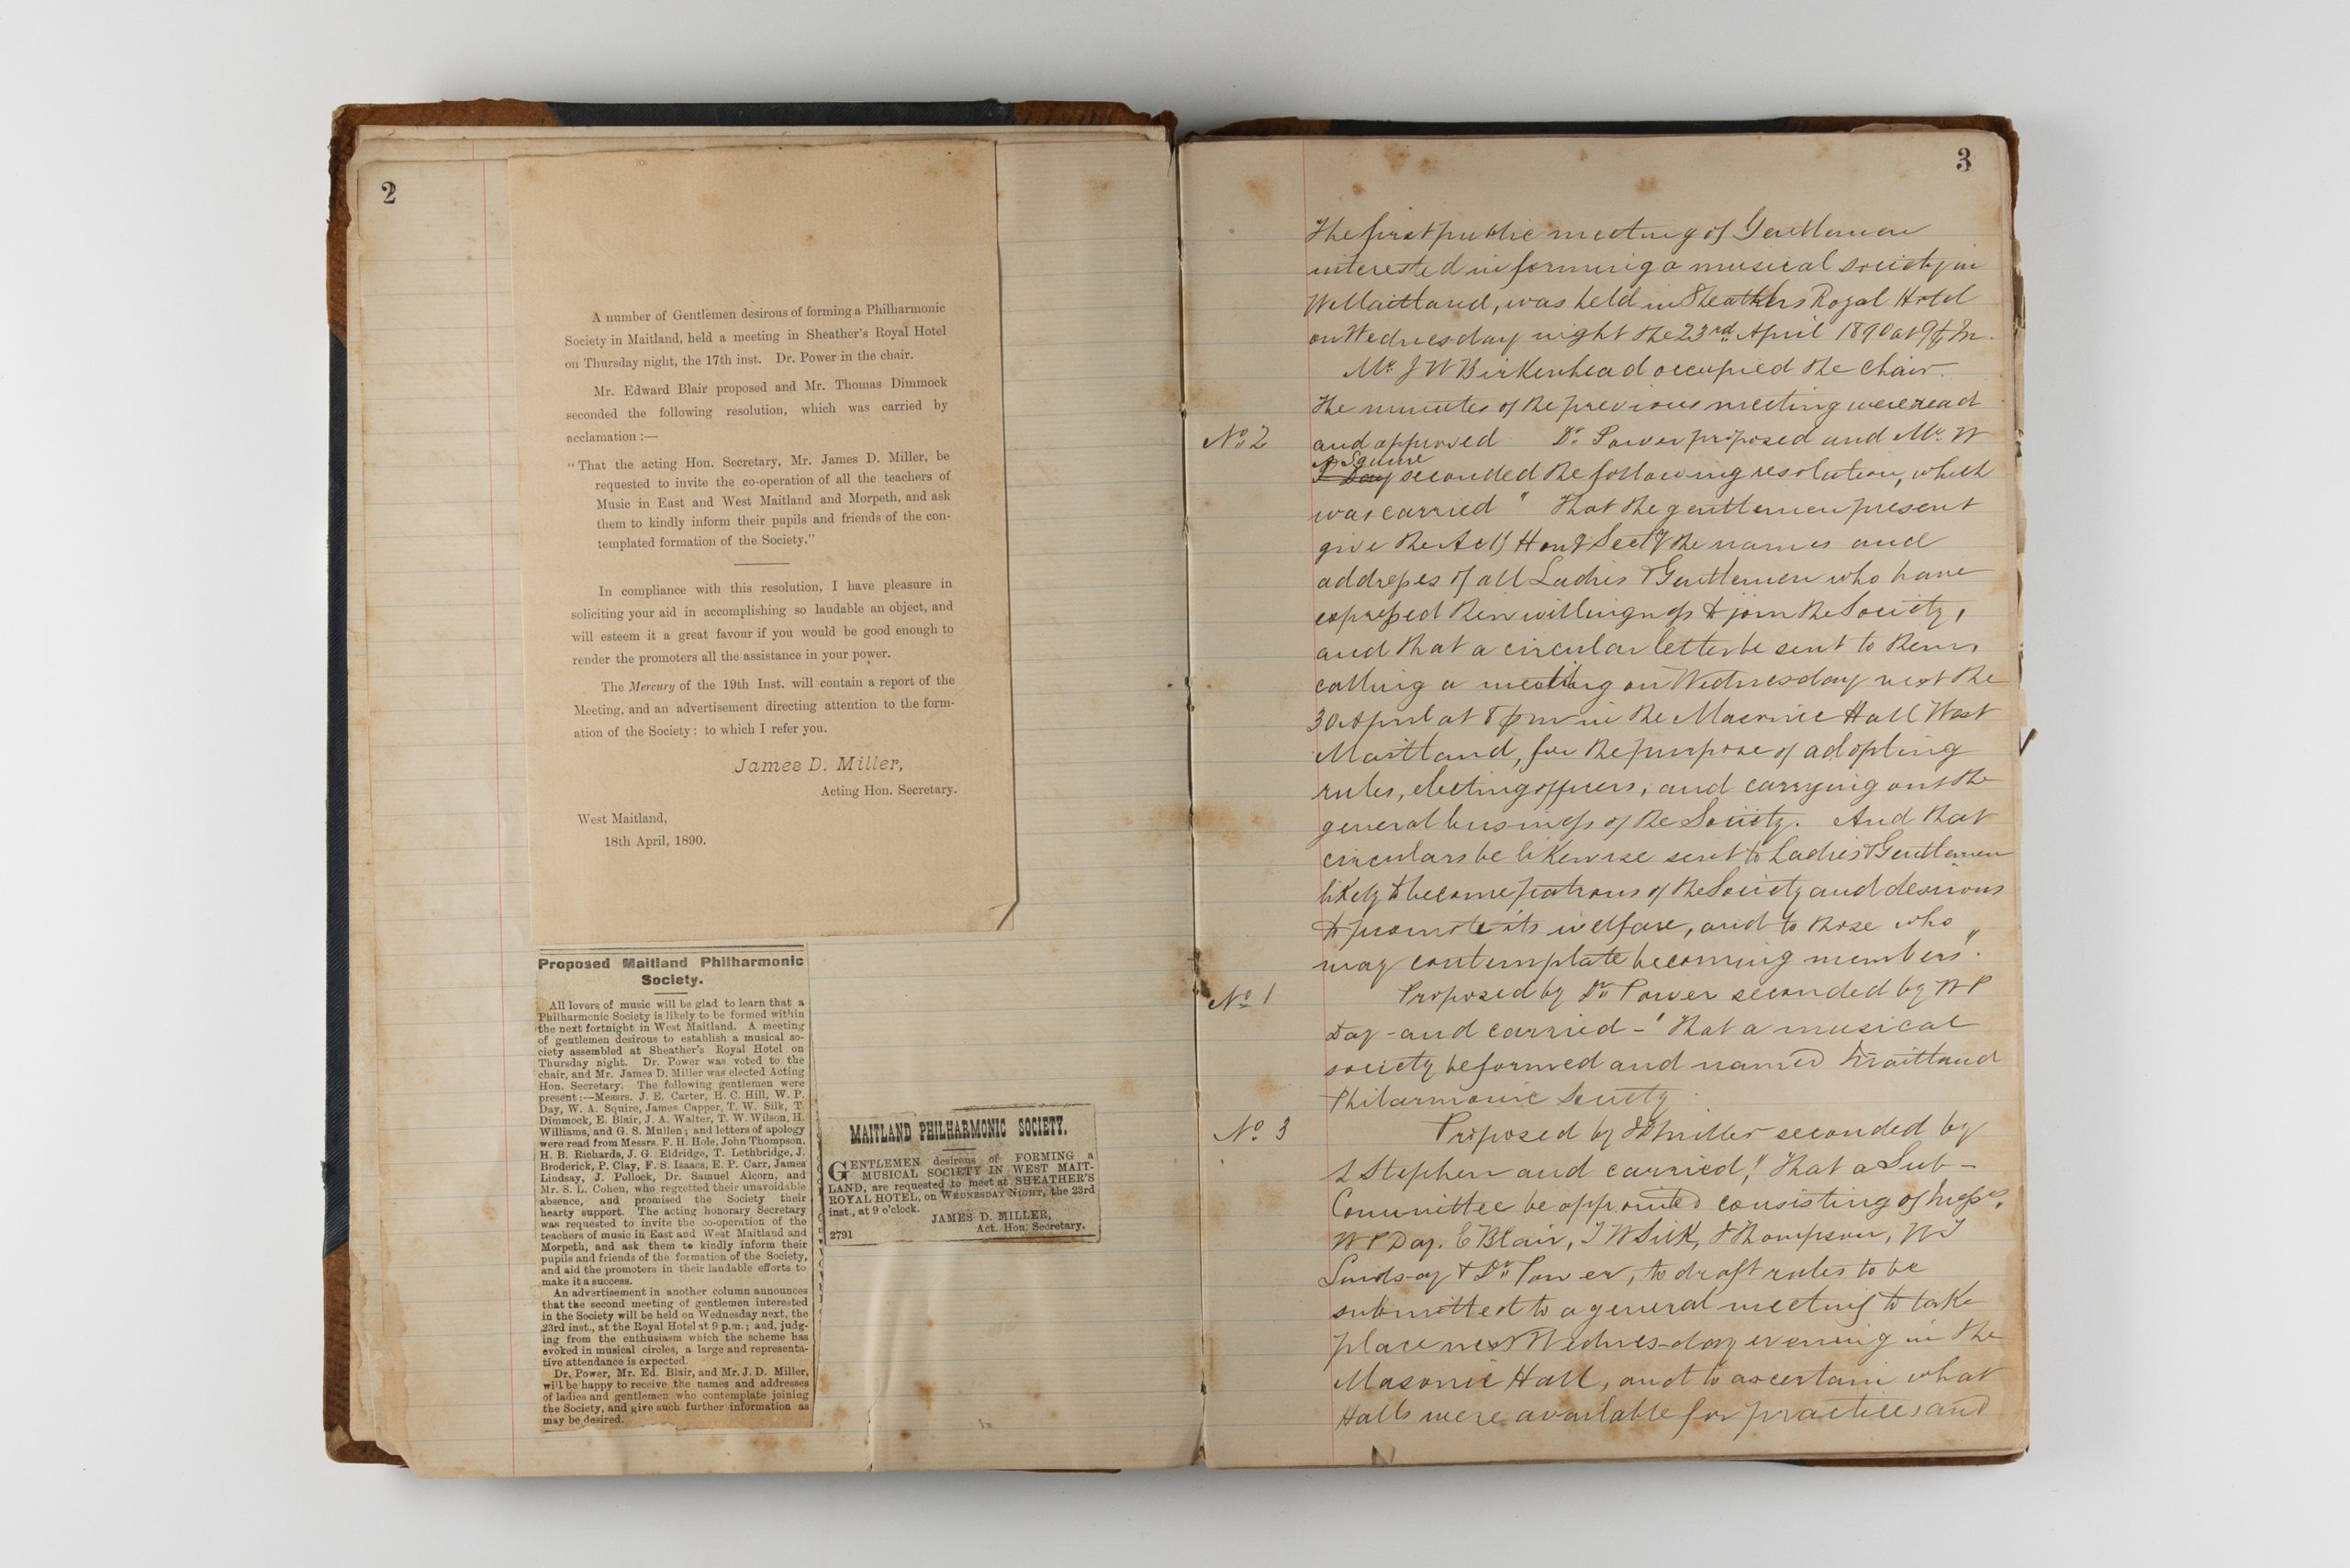 Open book with stained pages, handwritten cursive fills the right page and a few cuttings from newspapers talking about the society are stuck to the right as well as a letter from the Acting Hon. Secretary, Jamee D. Miller.